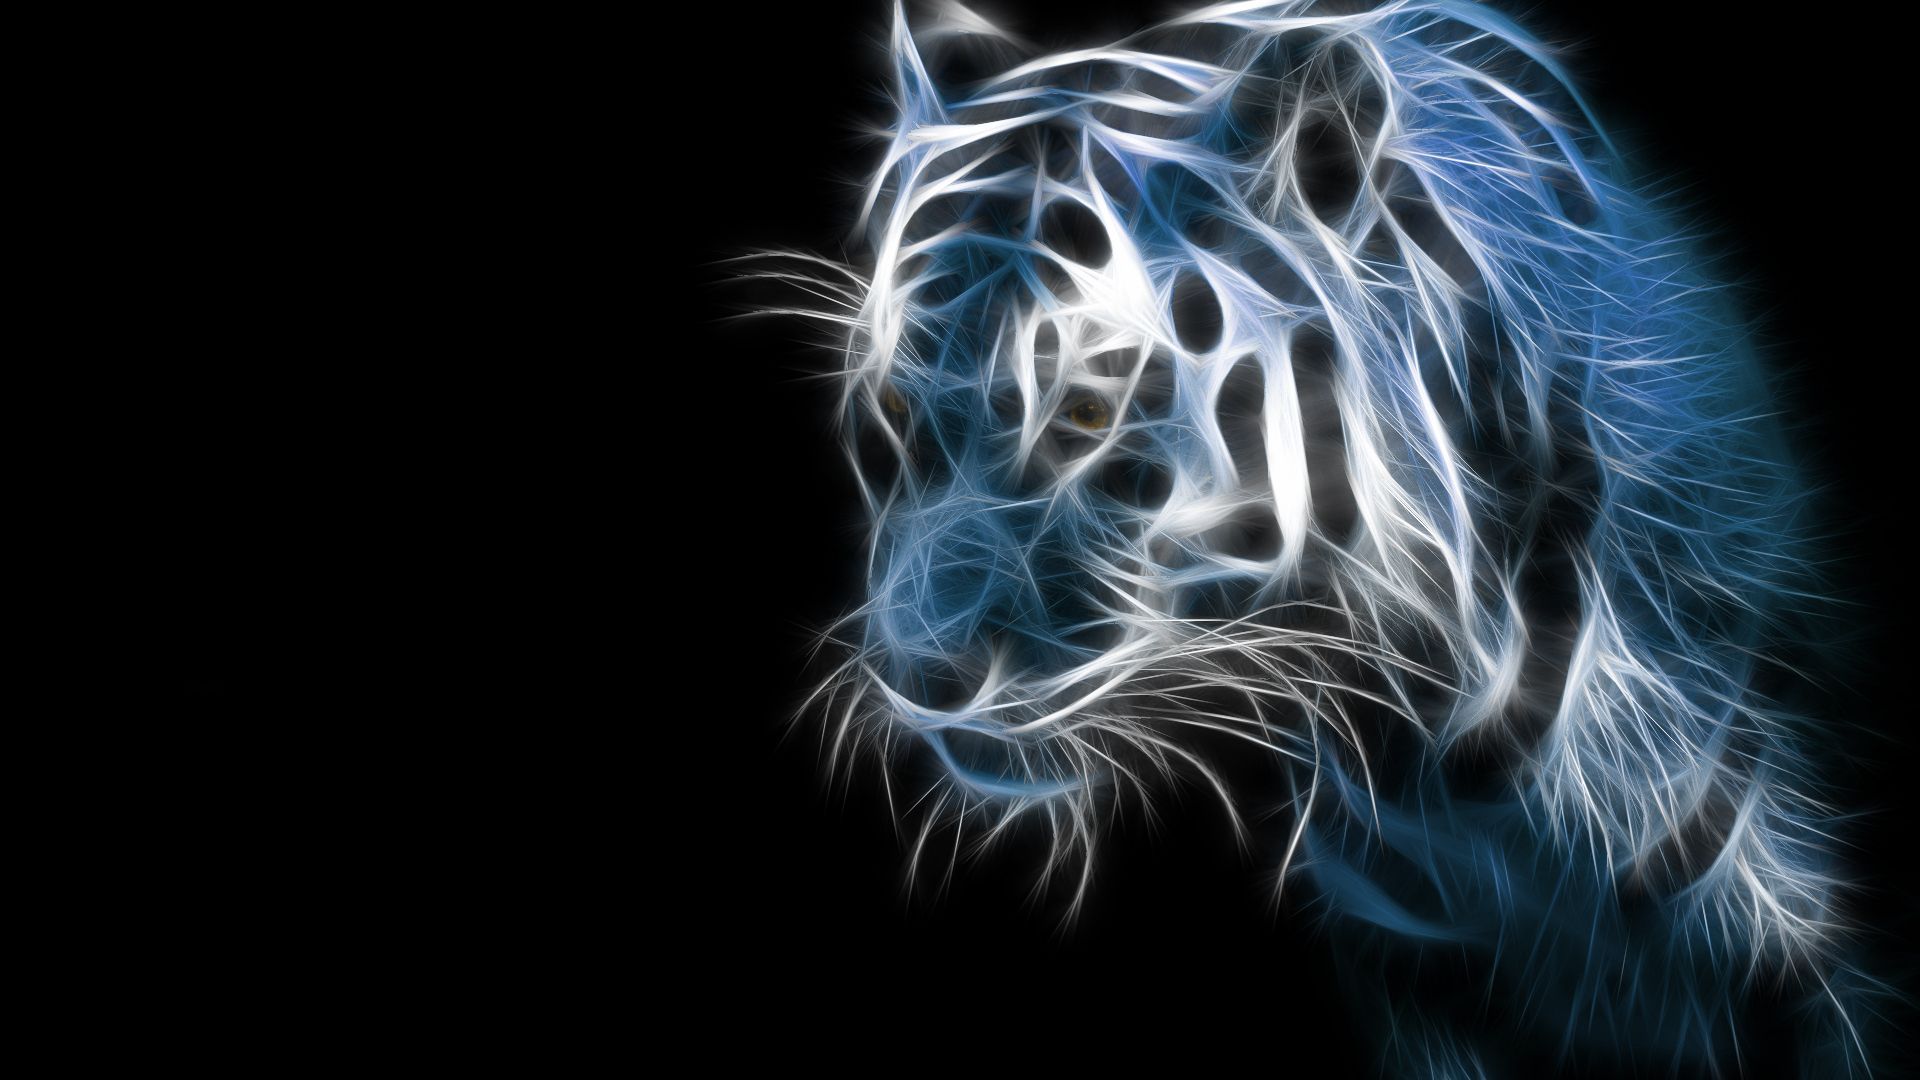 Download Tiger Animal Wallpaper 1920x1080 Full HD Backgrounds